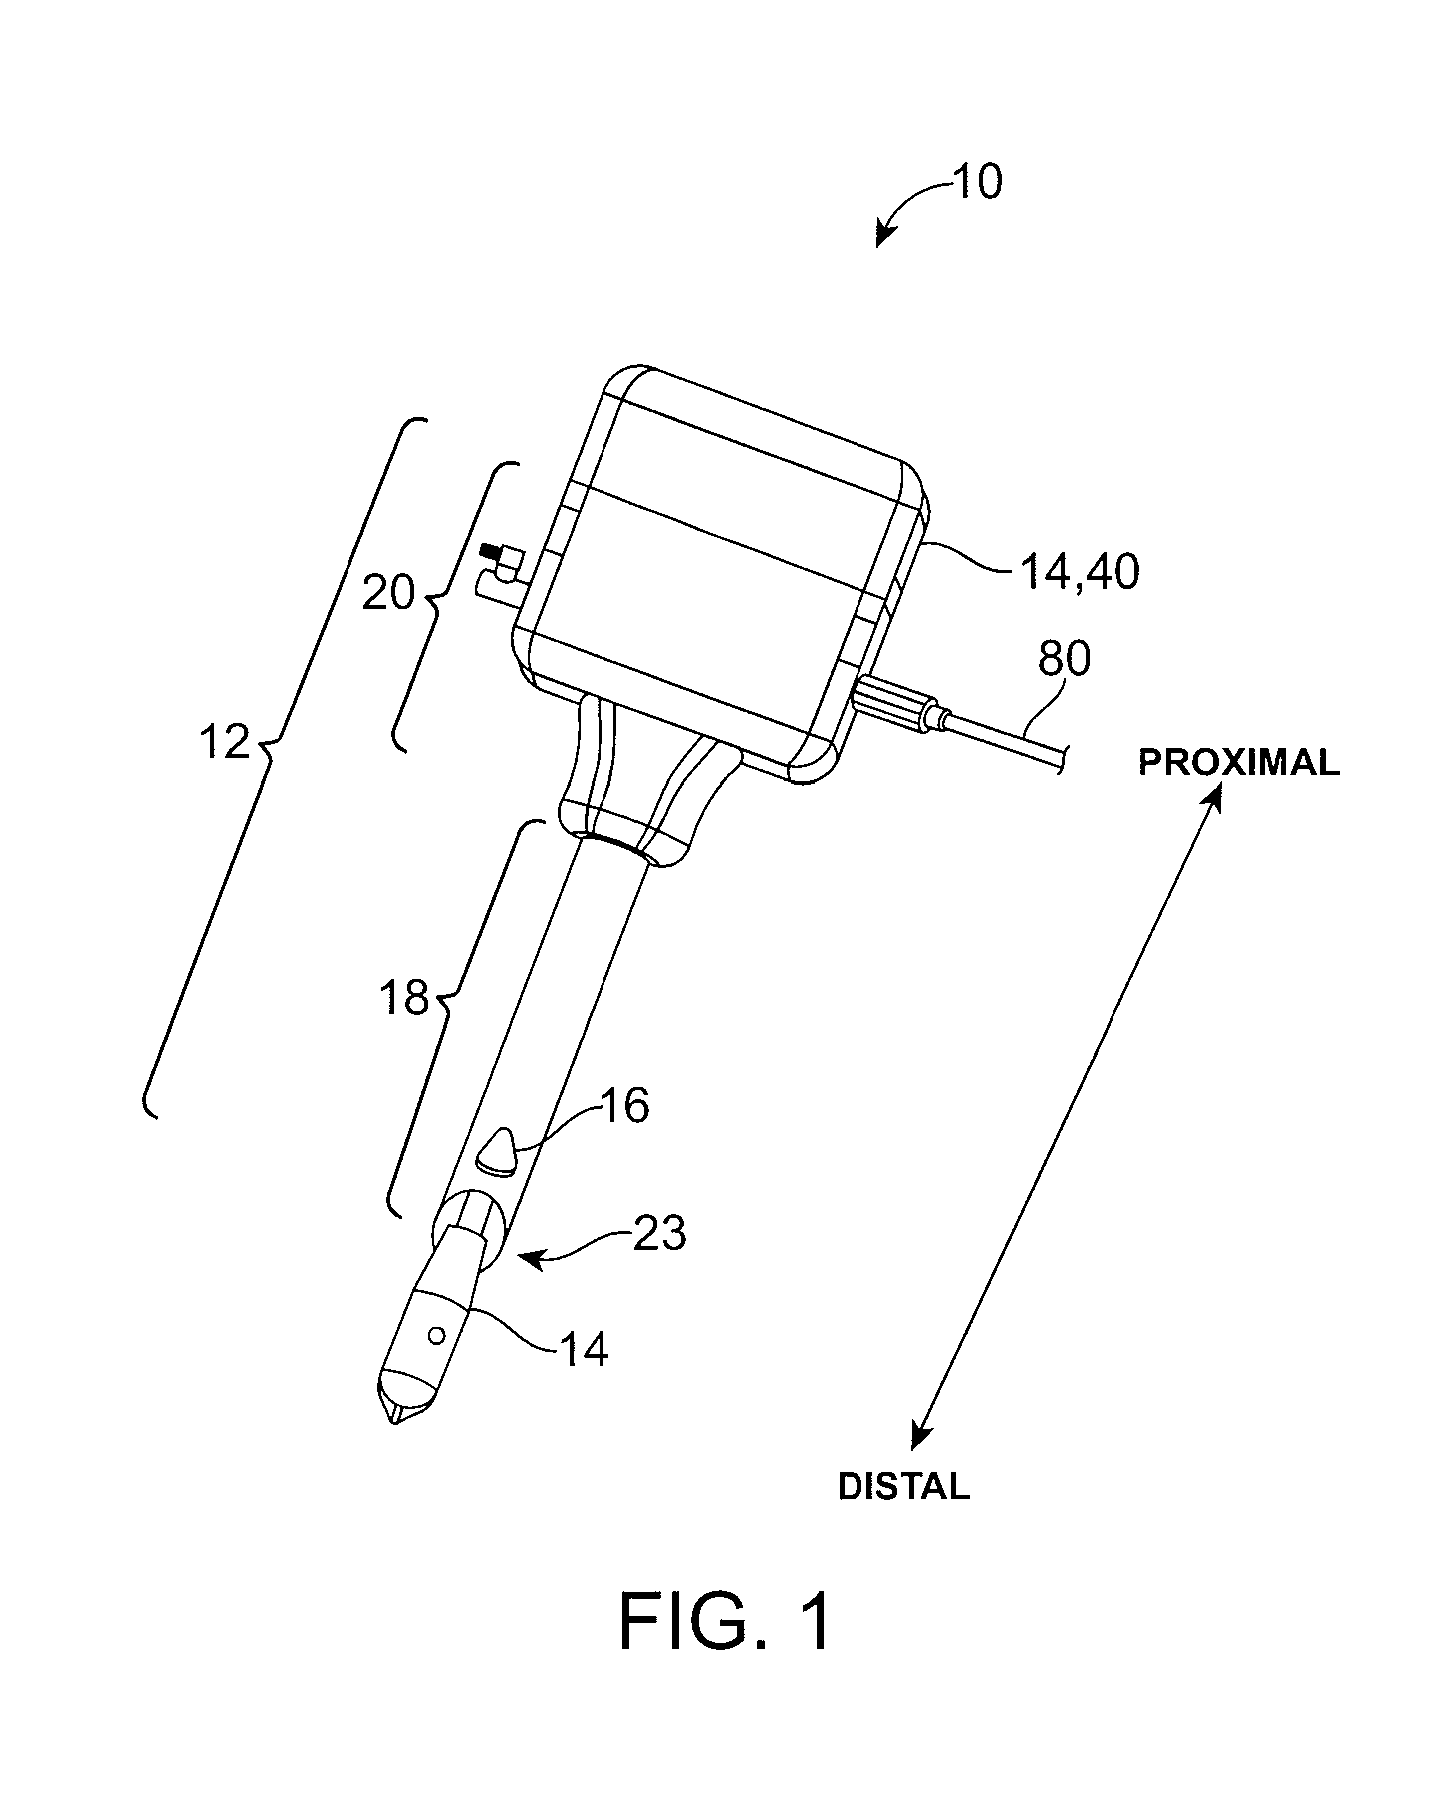 Surgical port with embedded imaging device